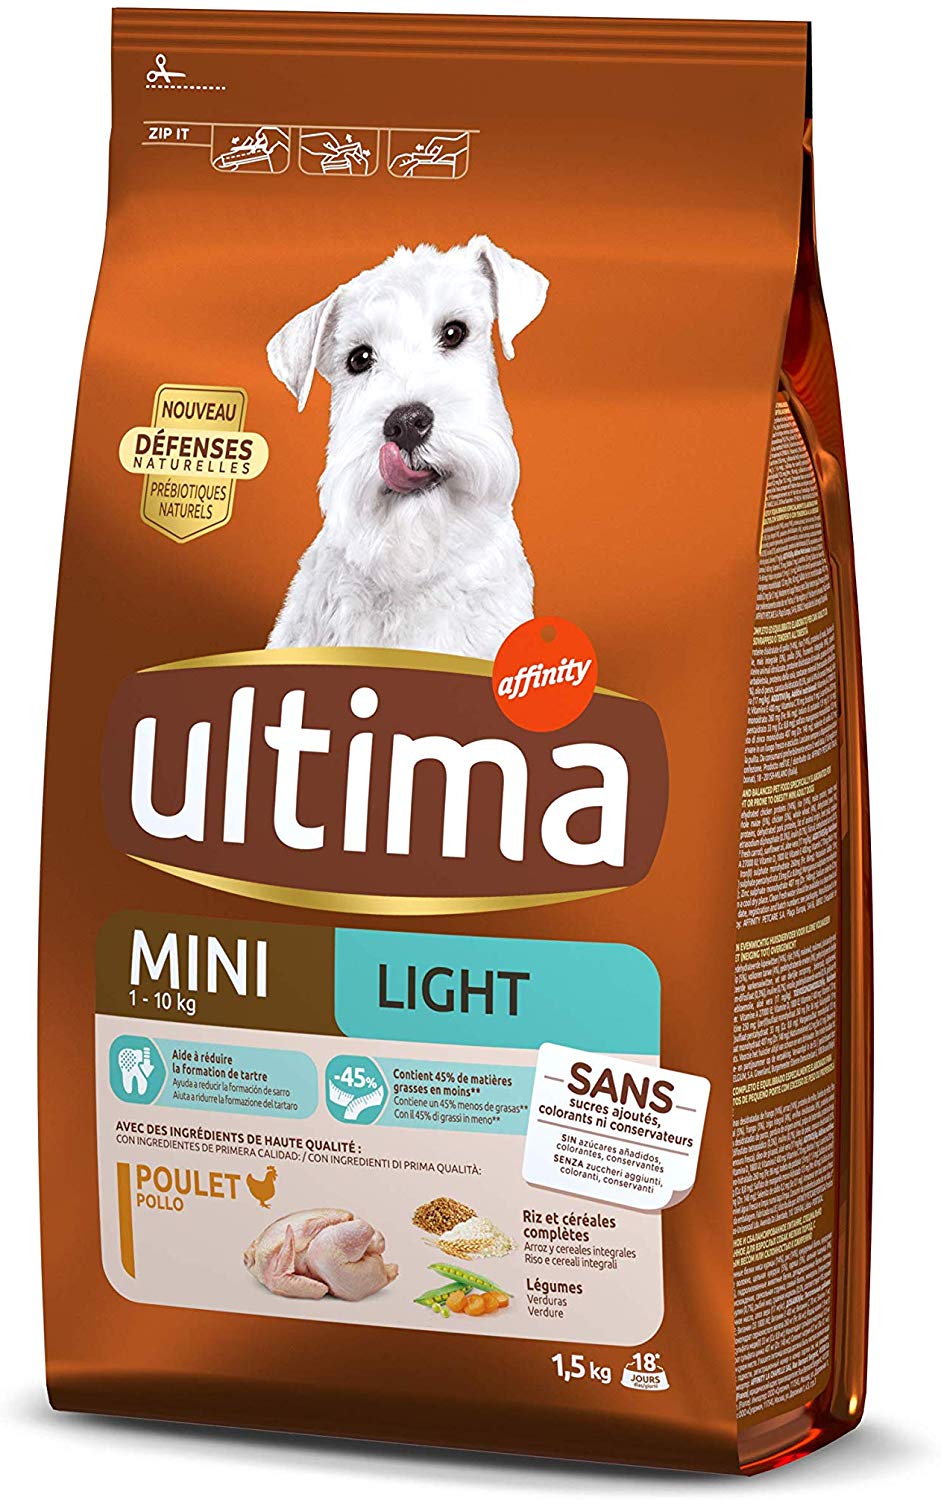 Ultima from Affinity, Dog